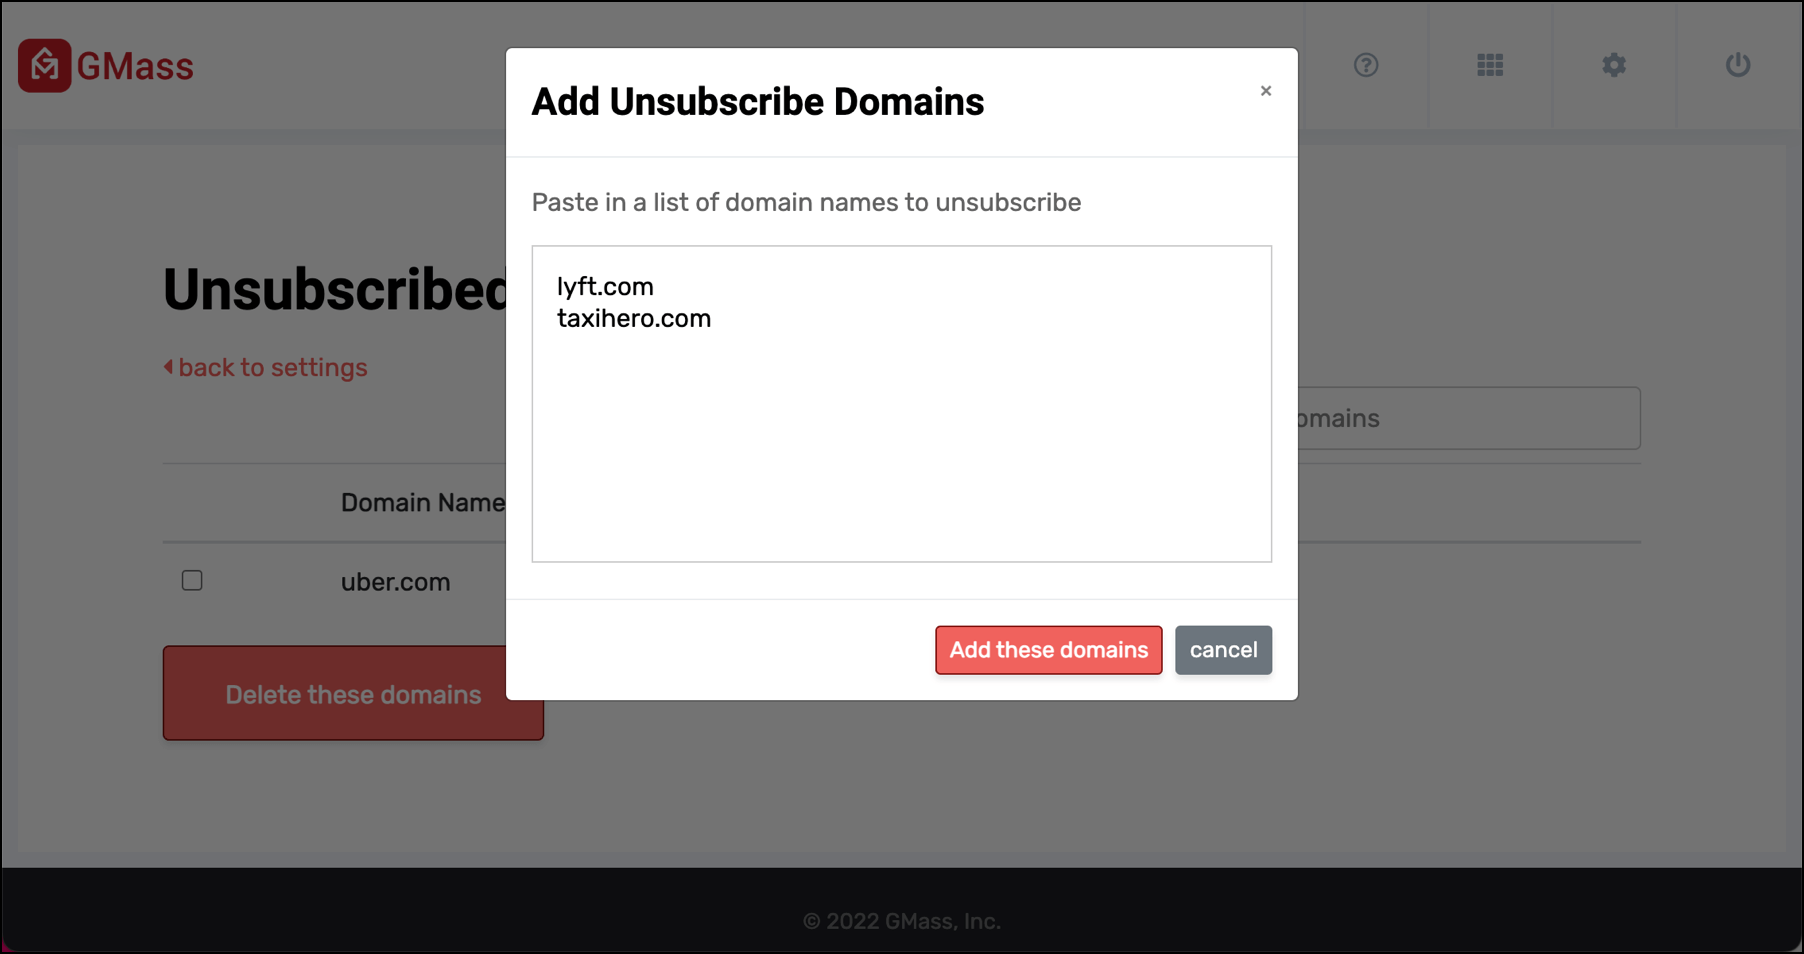 Add domains to unsubscribe